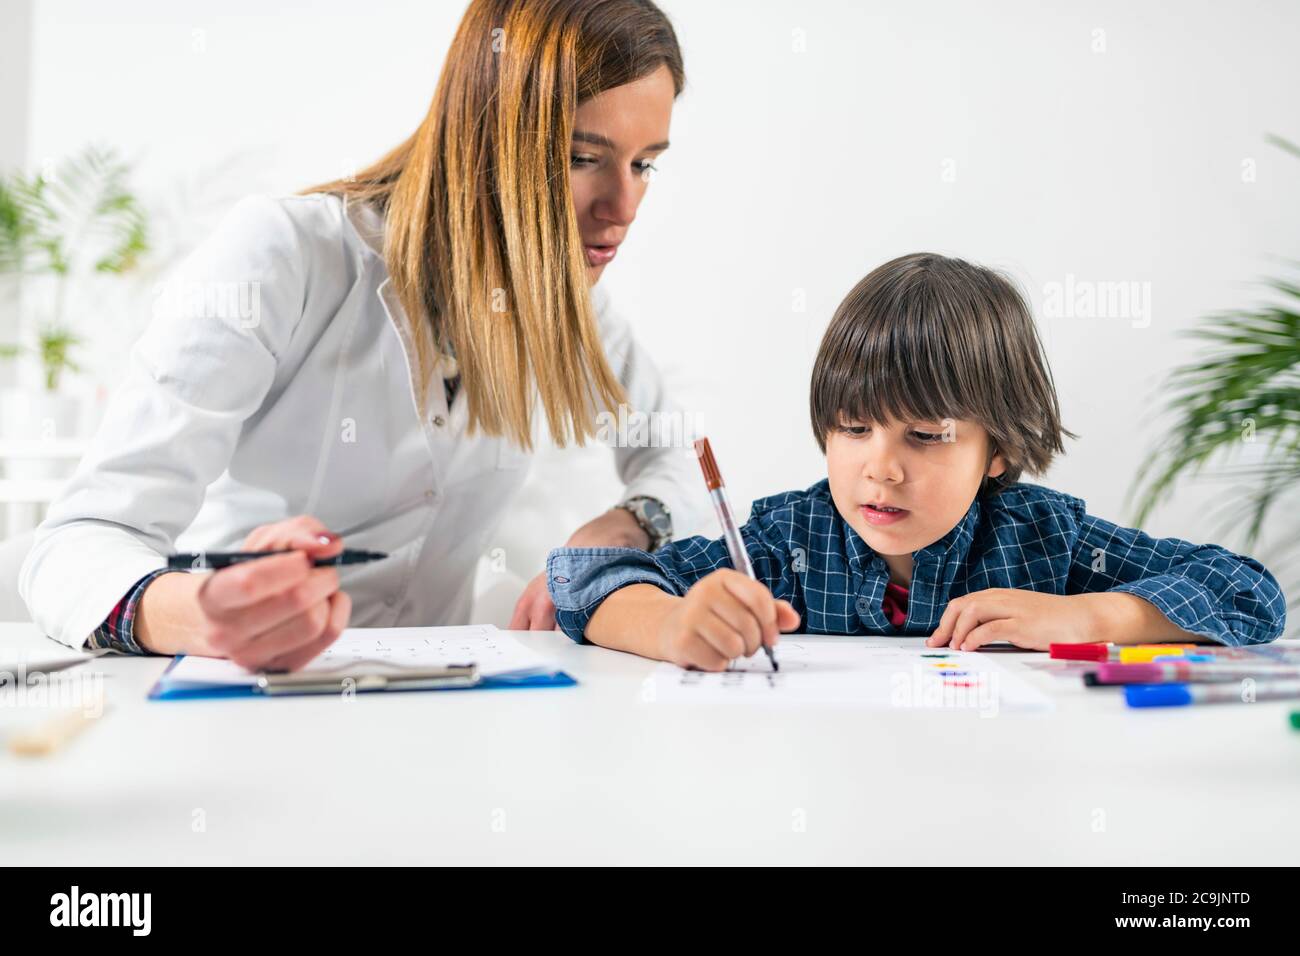 Psychology test for children. Toddler undergoing a logic test with numbers. Stock Photo